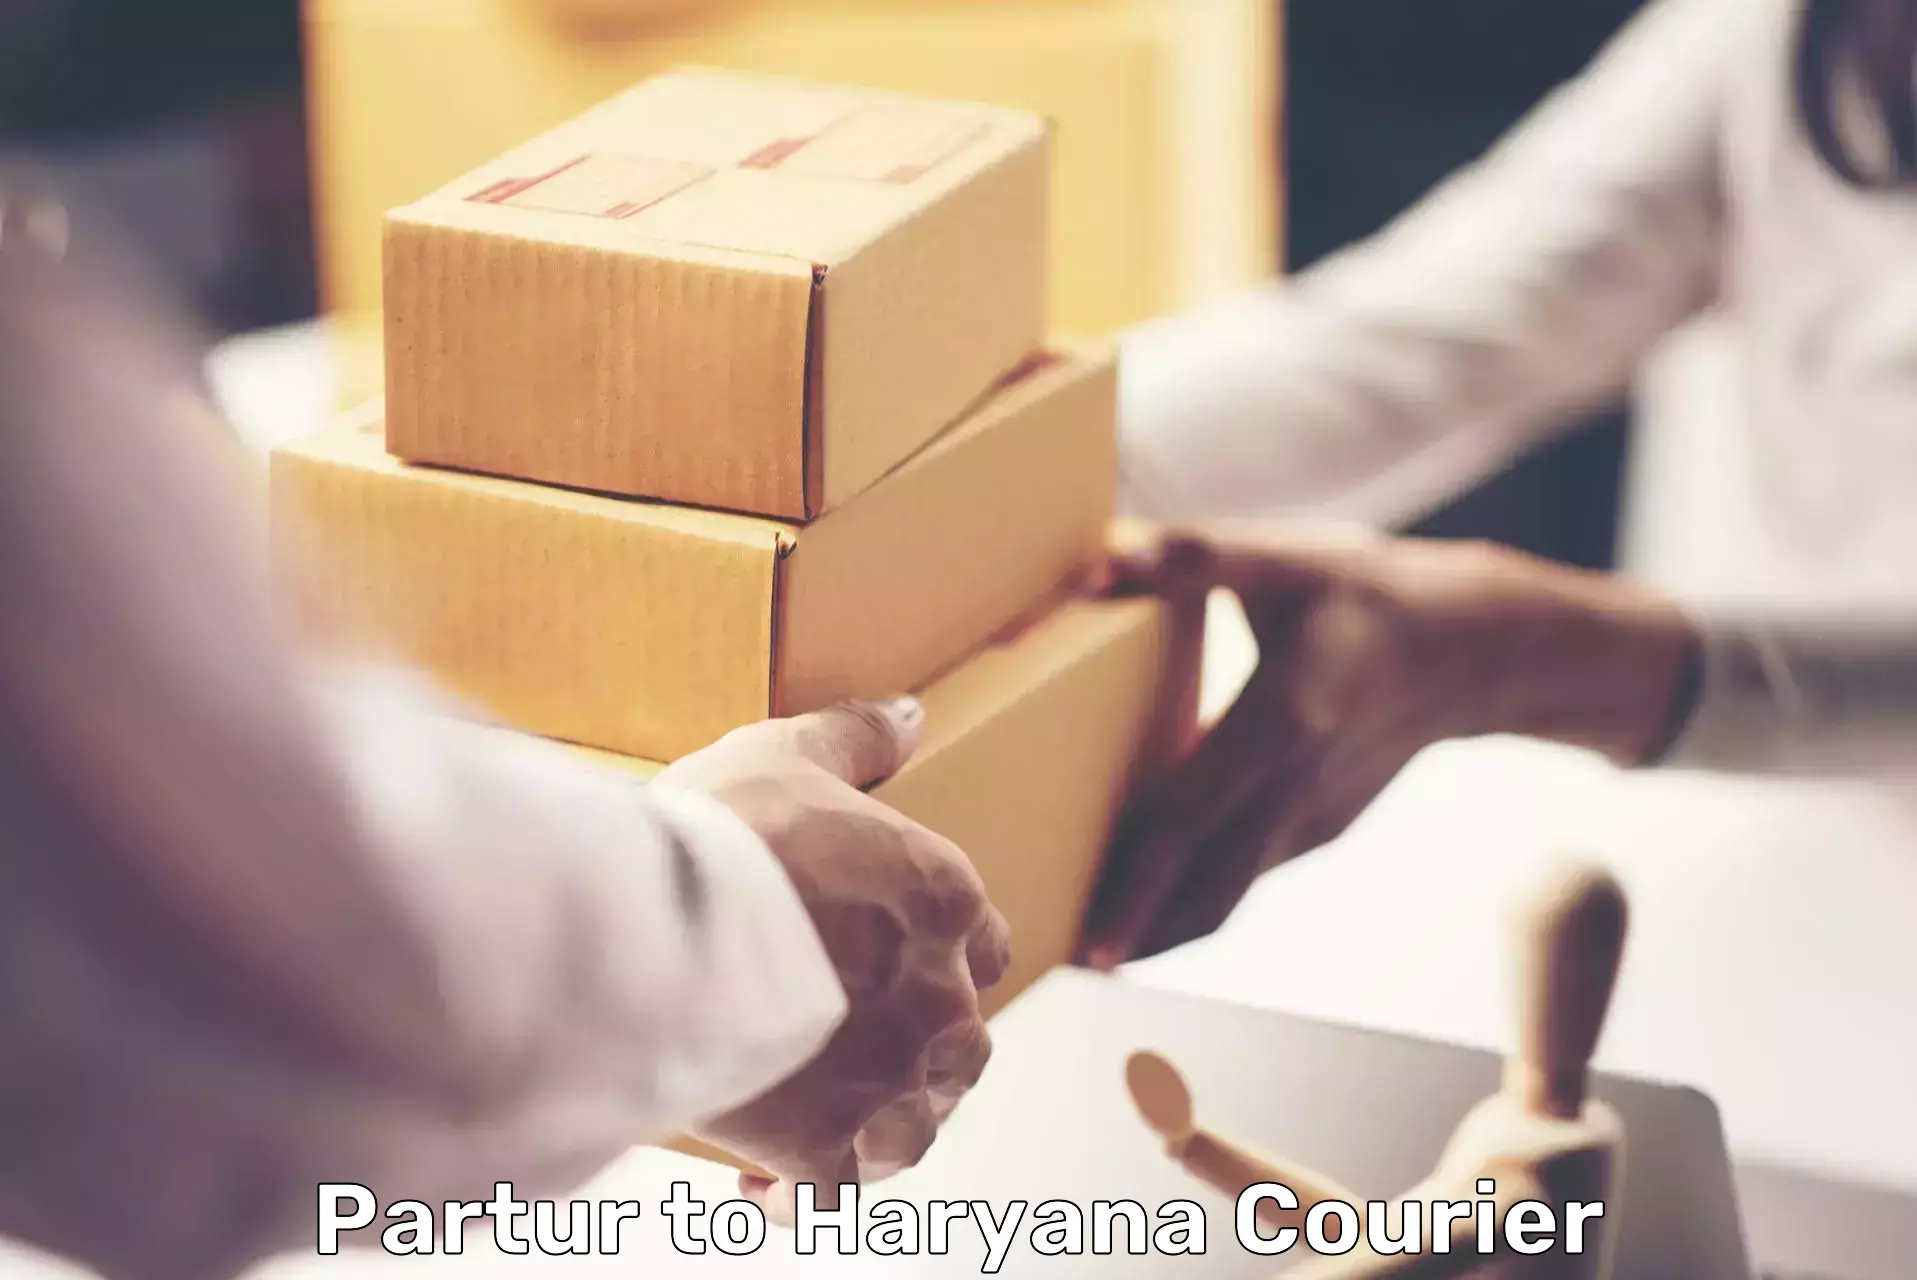 Quality courier partnerships in Partur to Gurgaon